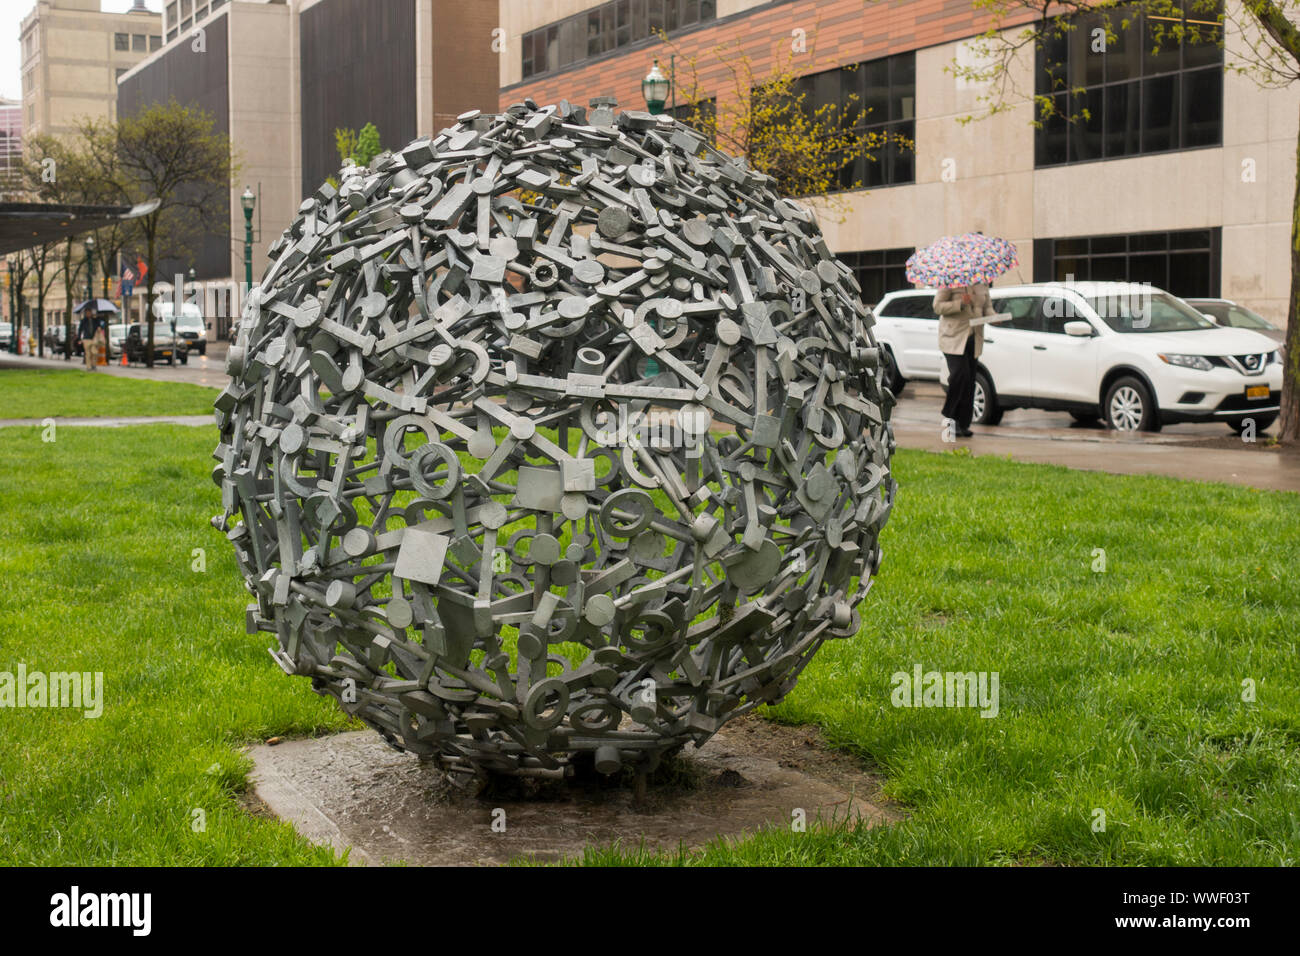 Round found objects sculpture in park Syracuse NY Stock Photo - Alamy